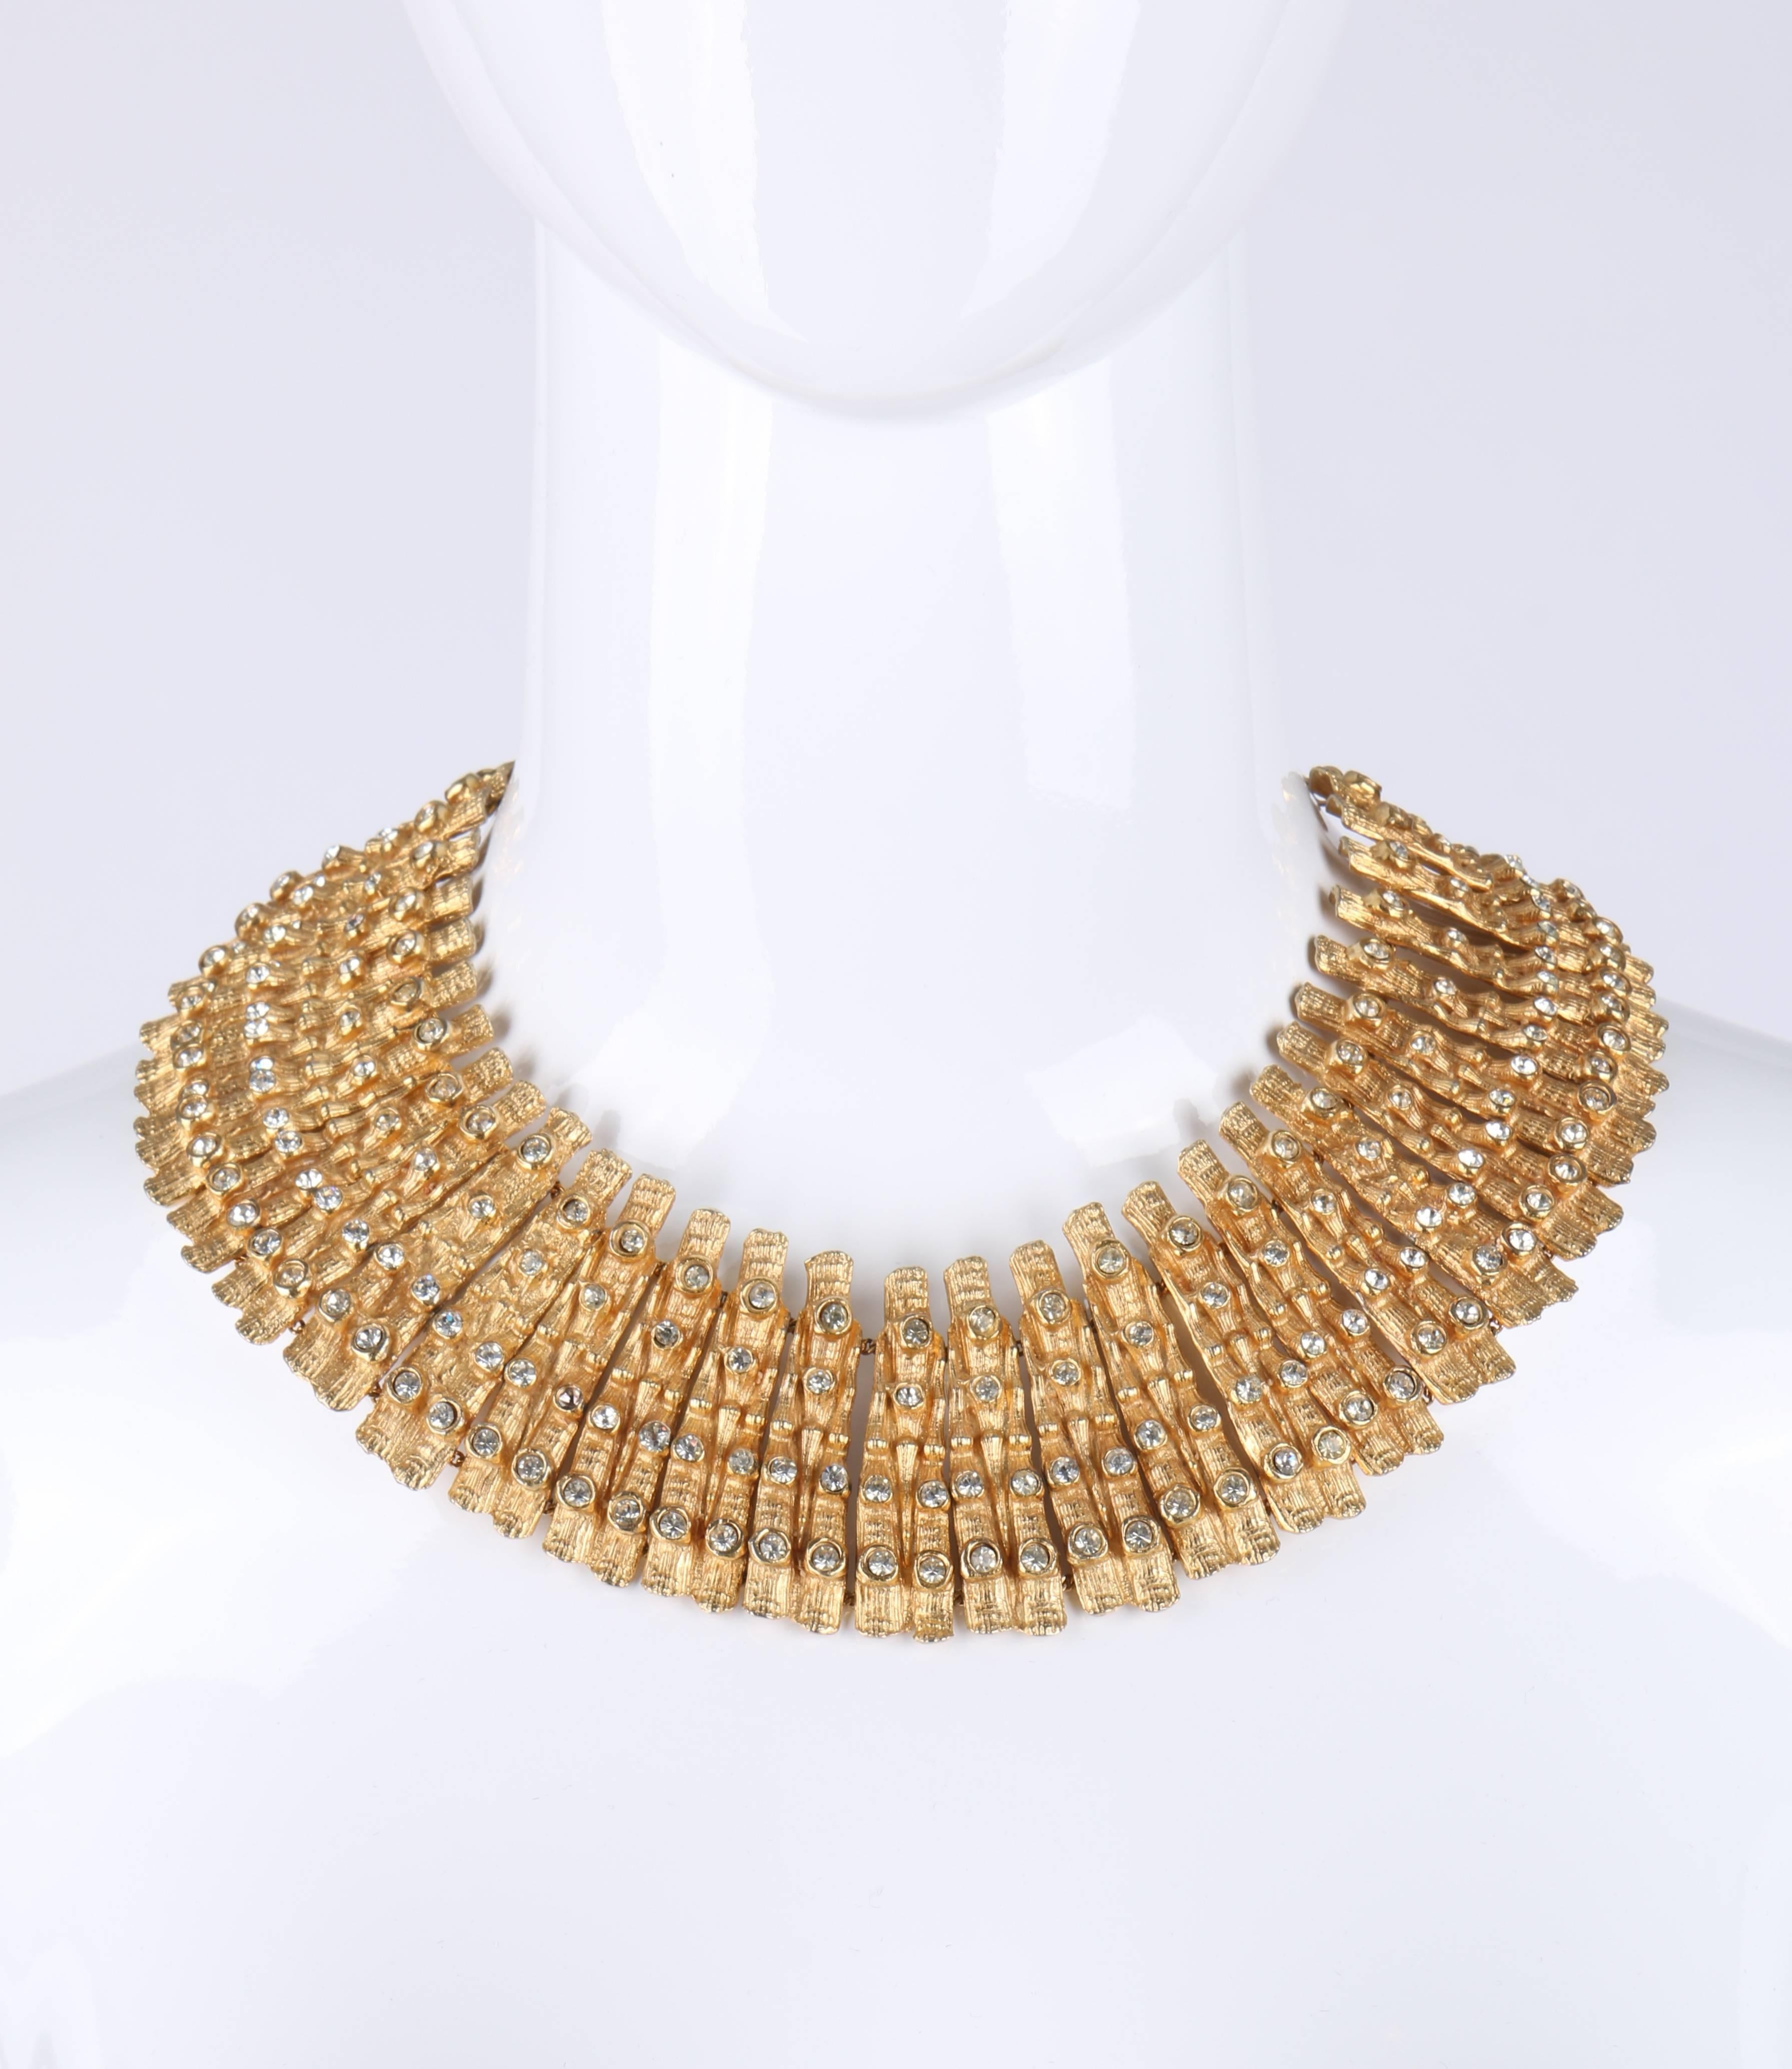 Vintage Mosell c.1950's Egyptian revival collar necklace and earrings set. Huge statement gold tone collar necklace. Carved bamboo design links with 4 round bezel set faceted clear rhinestones in a vertical row on each. J hook clasp closure.